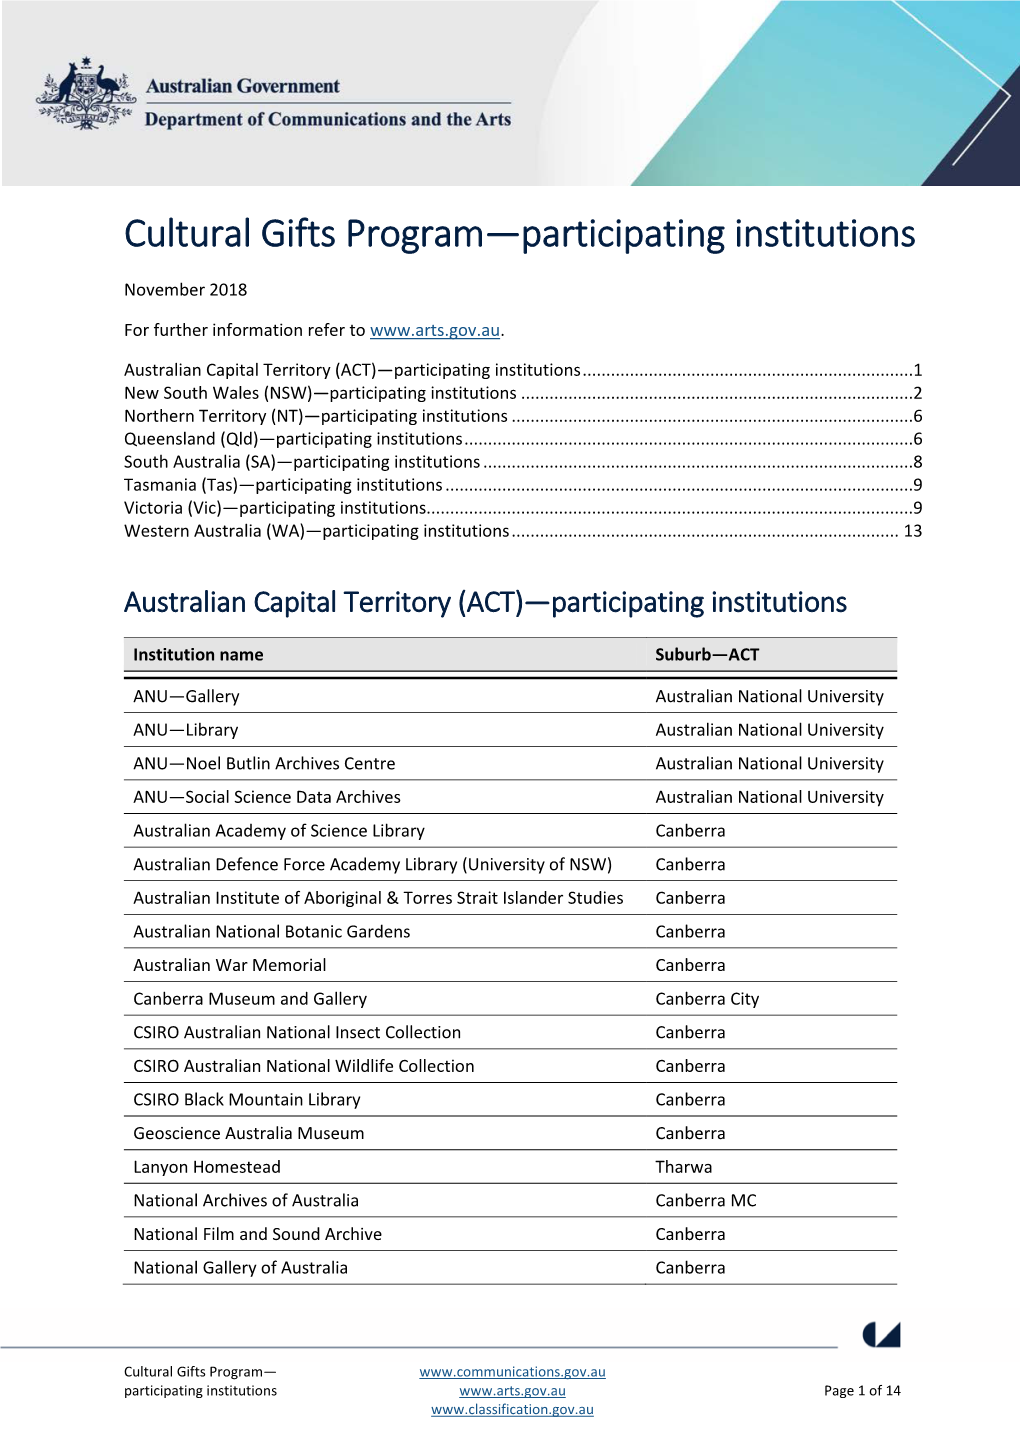 Cultural Gifts Program—Participating Institutions